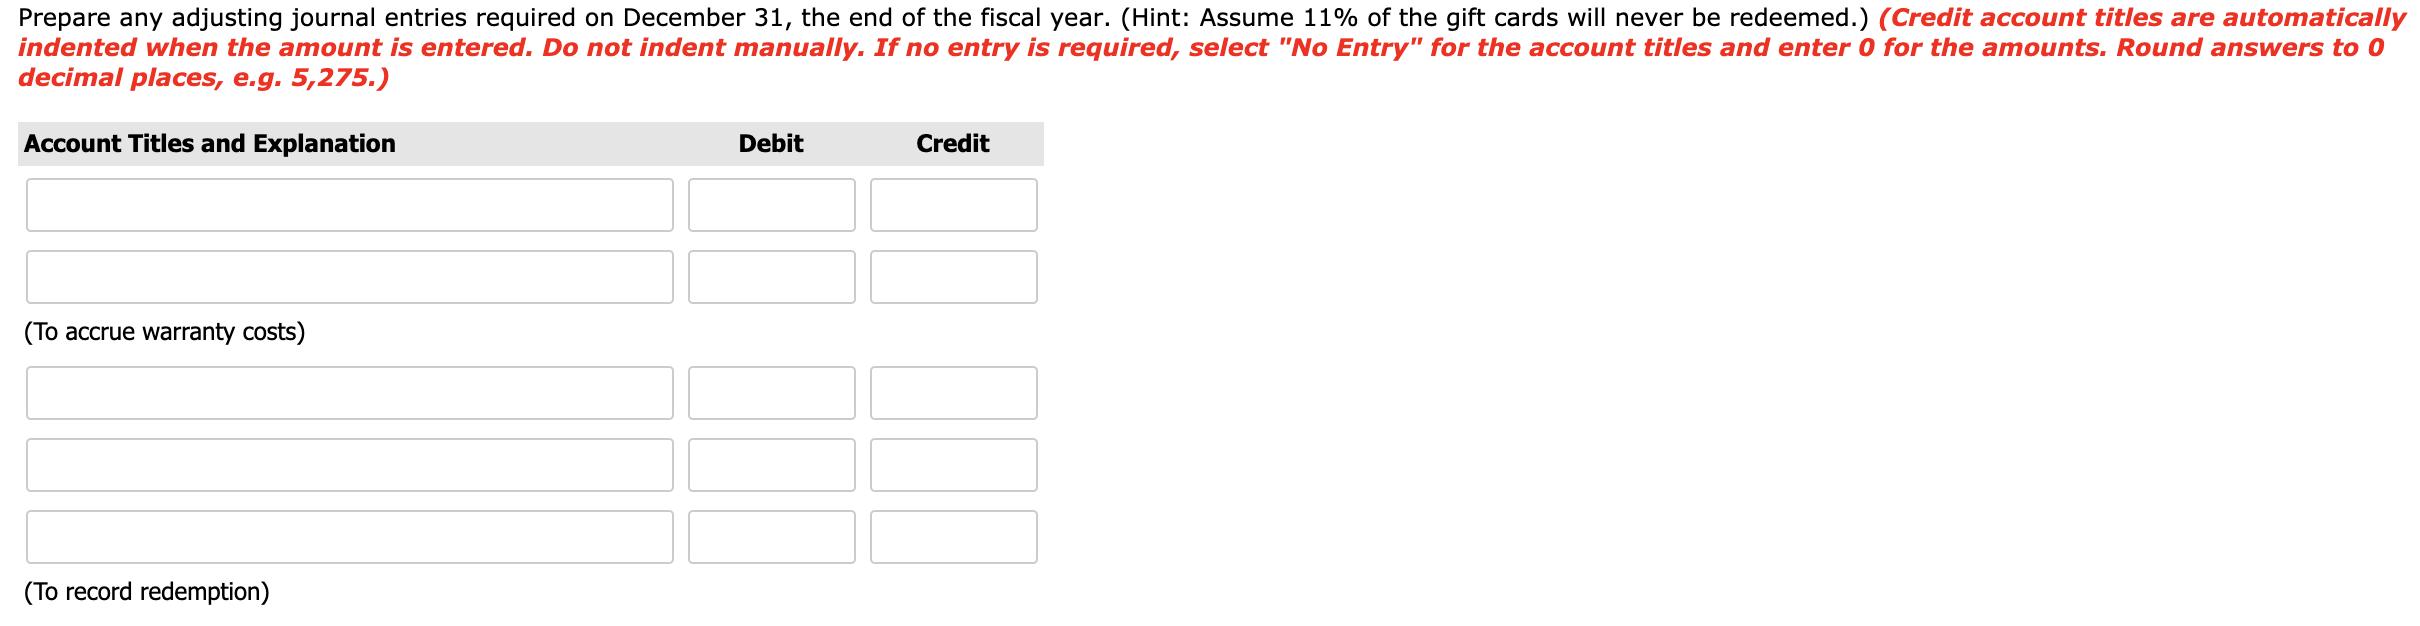 Prepare any adjusting journal entries required on December 31, the end of the fiscal year. (Hint: Assume 11% of the gift card